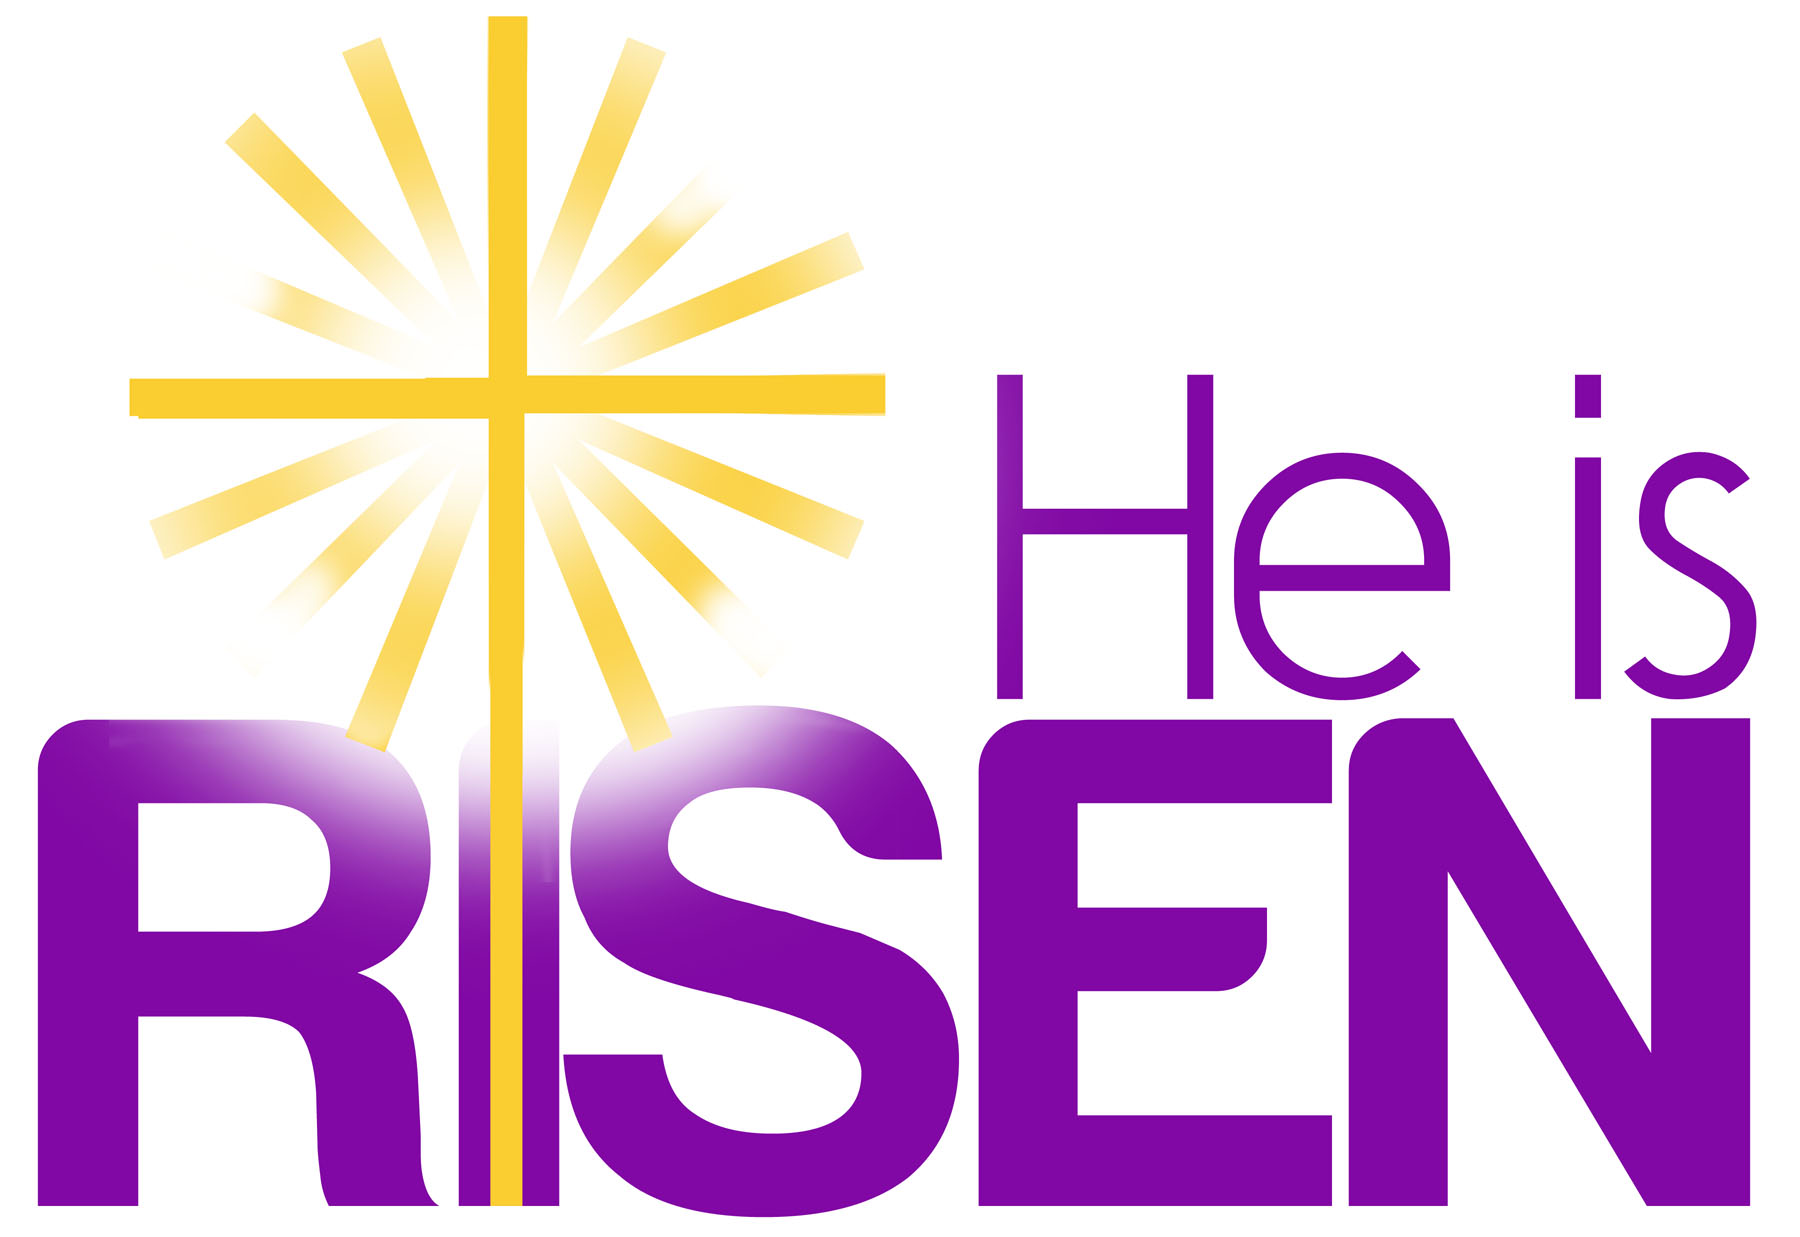 Images of Religious Easter Pictures Free - Jefney